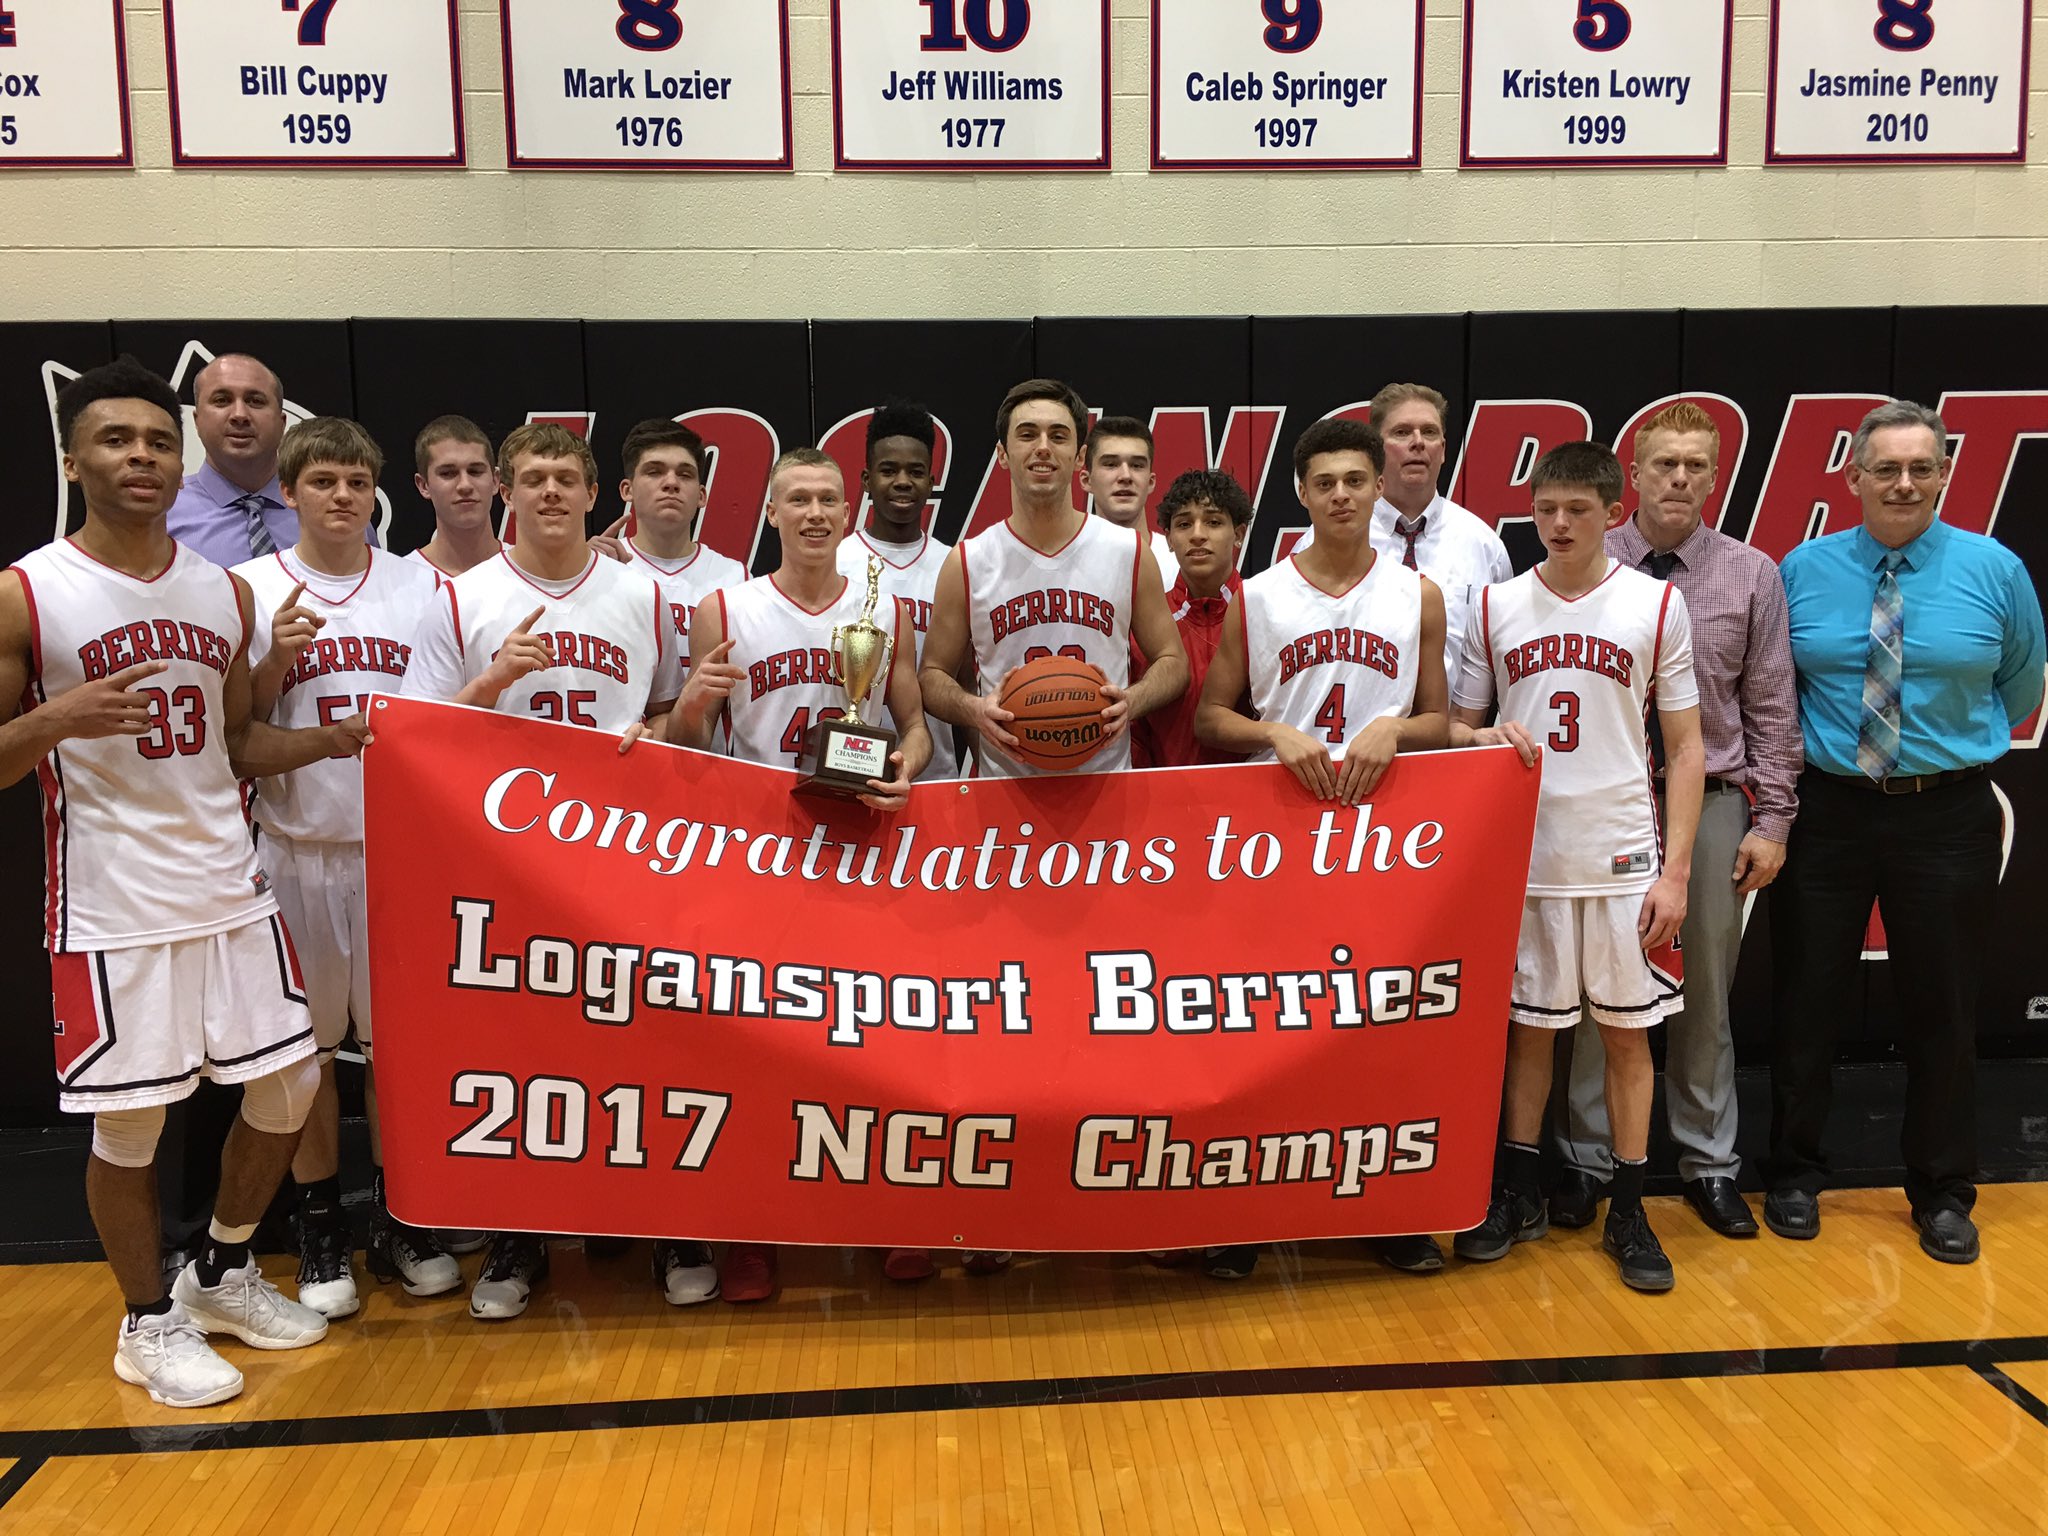 Thumbnail for the post titled: Logansport Berries are 2017 NCC Champs